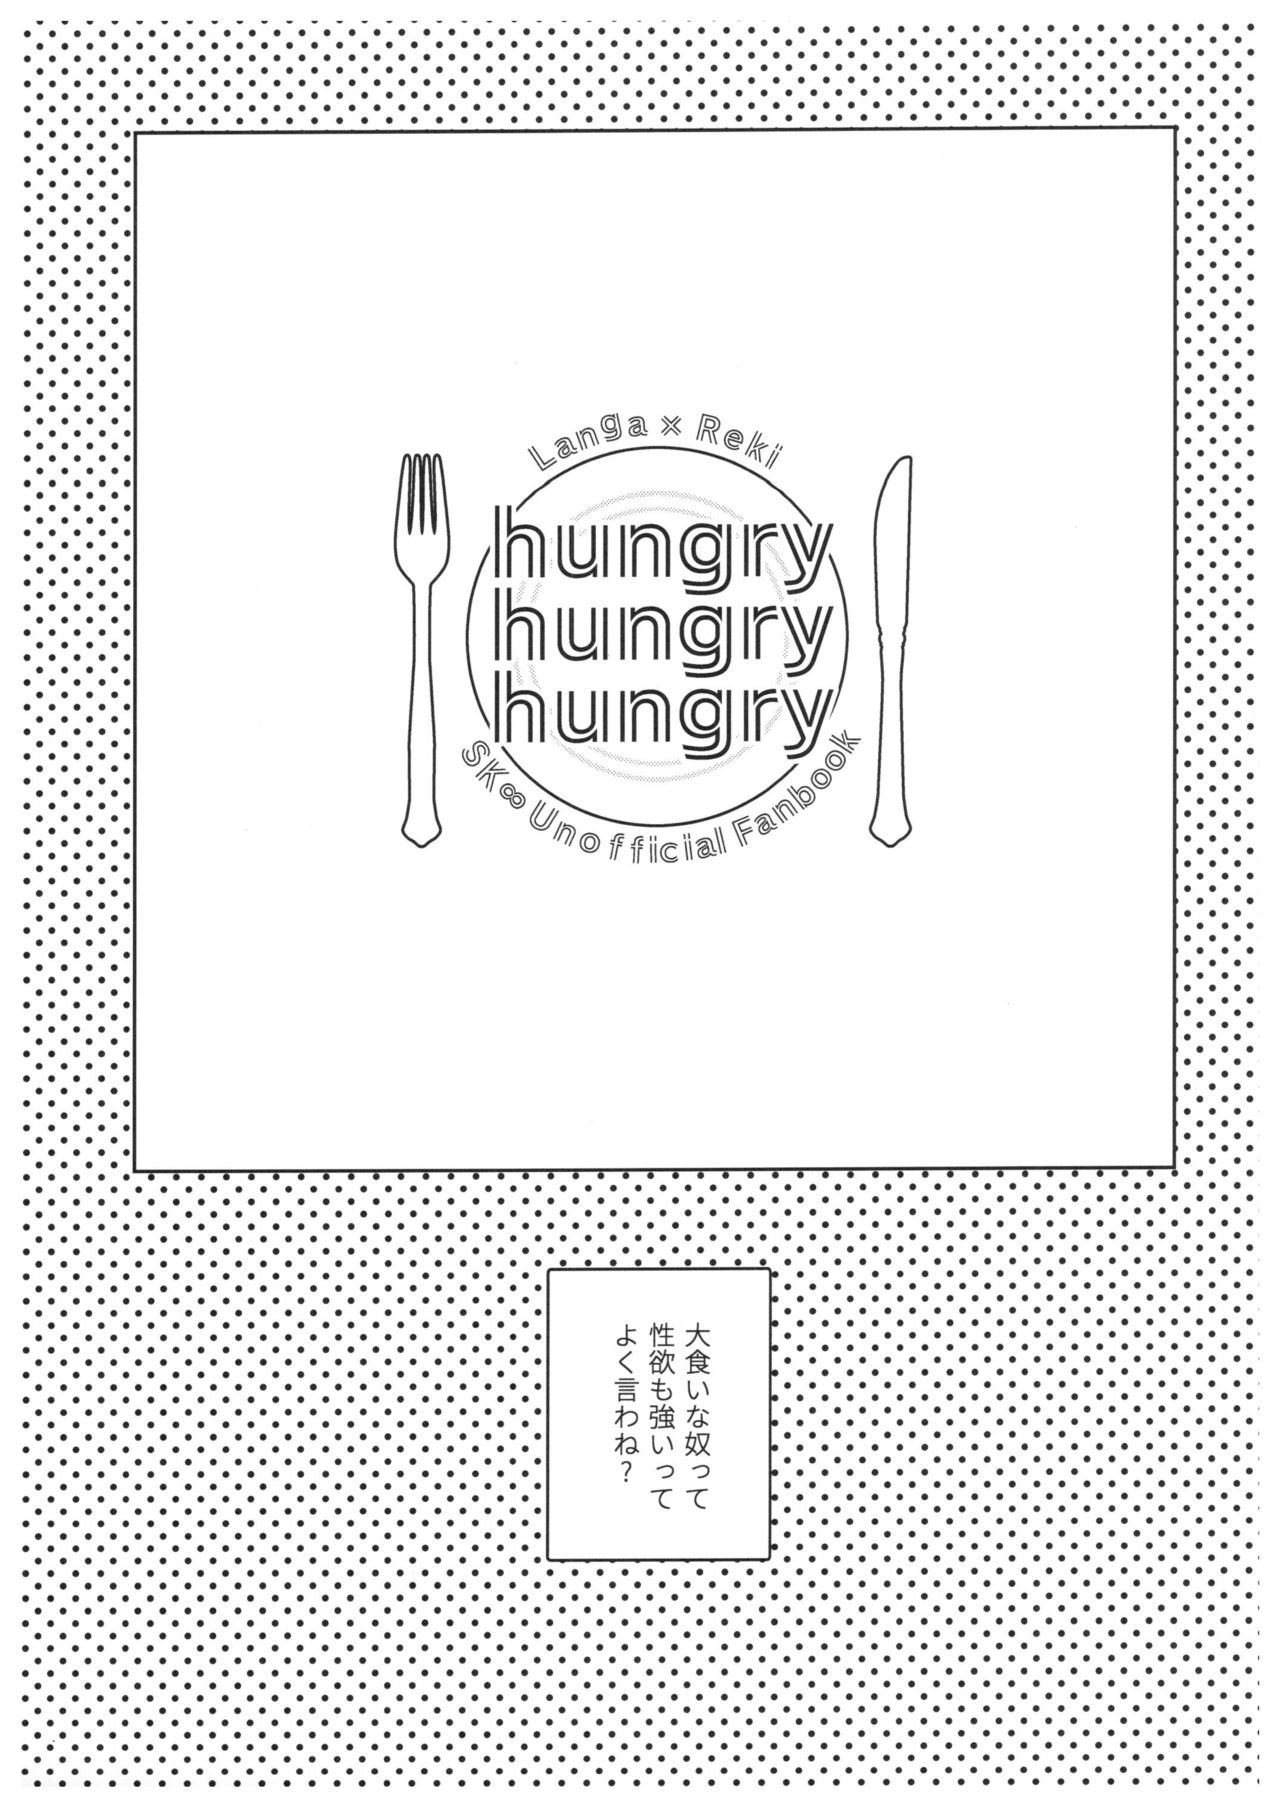 (CC福岡55) [坂井屋 (坂井)] hungry hungry hungry (SK8 エスケーエイト)